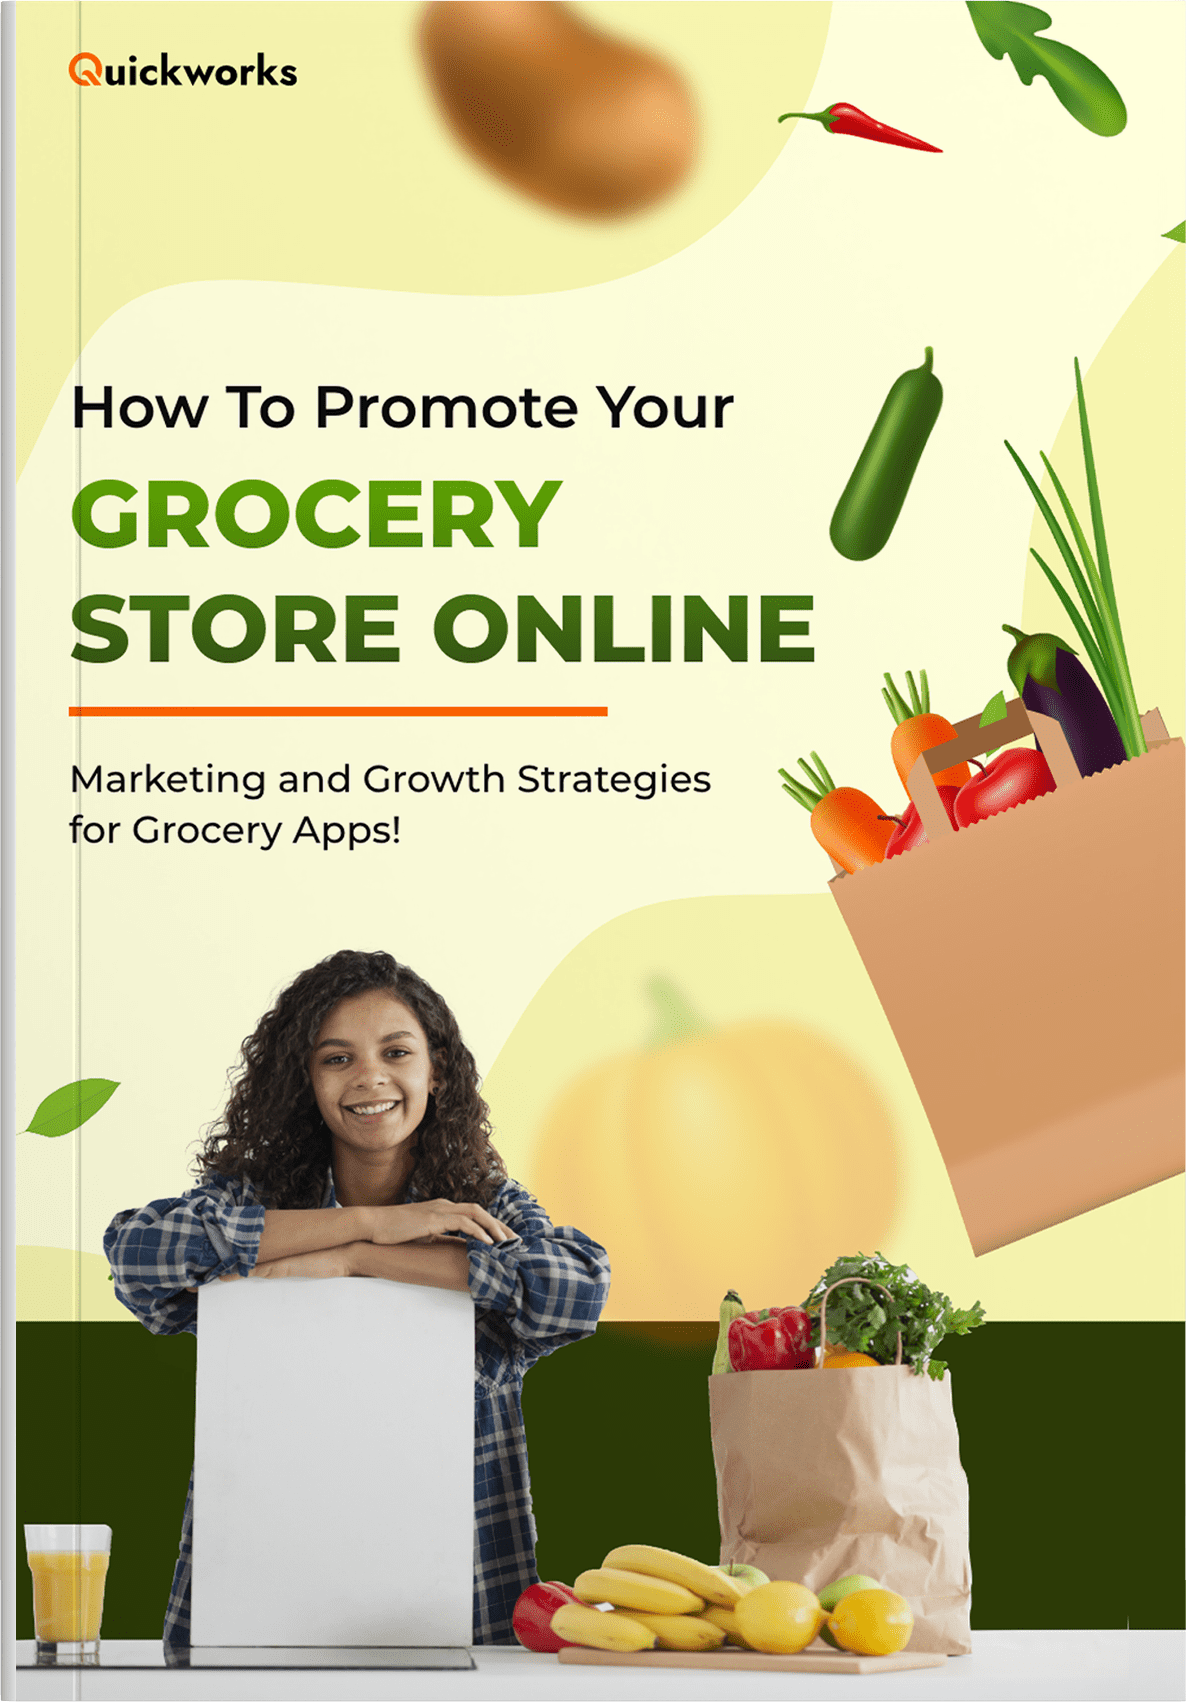 How To Promote Your Grocery Store Online?